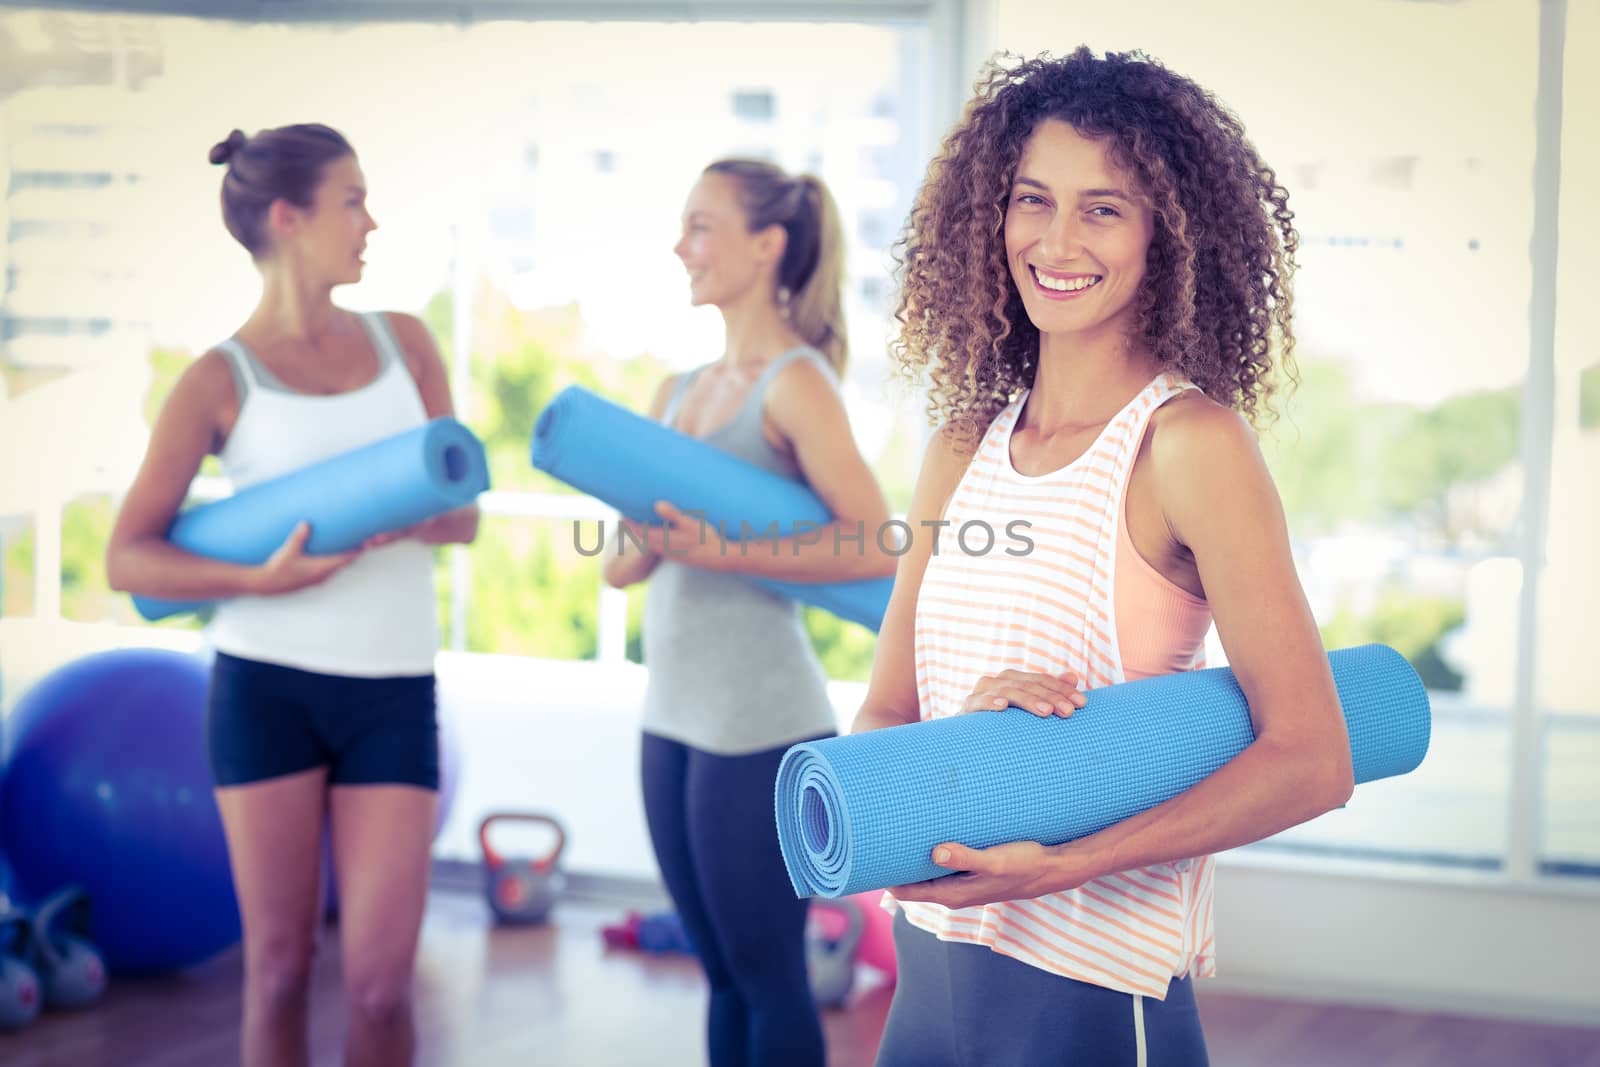 Portrait of woman holding yoga mat and smiling in fitness studio